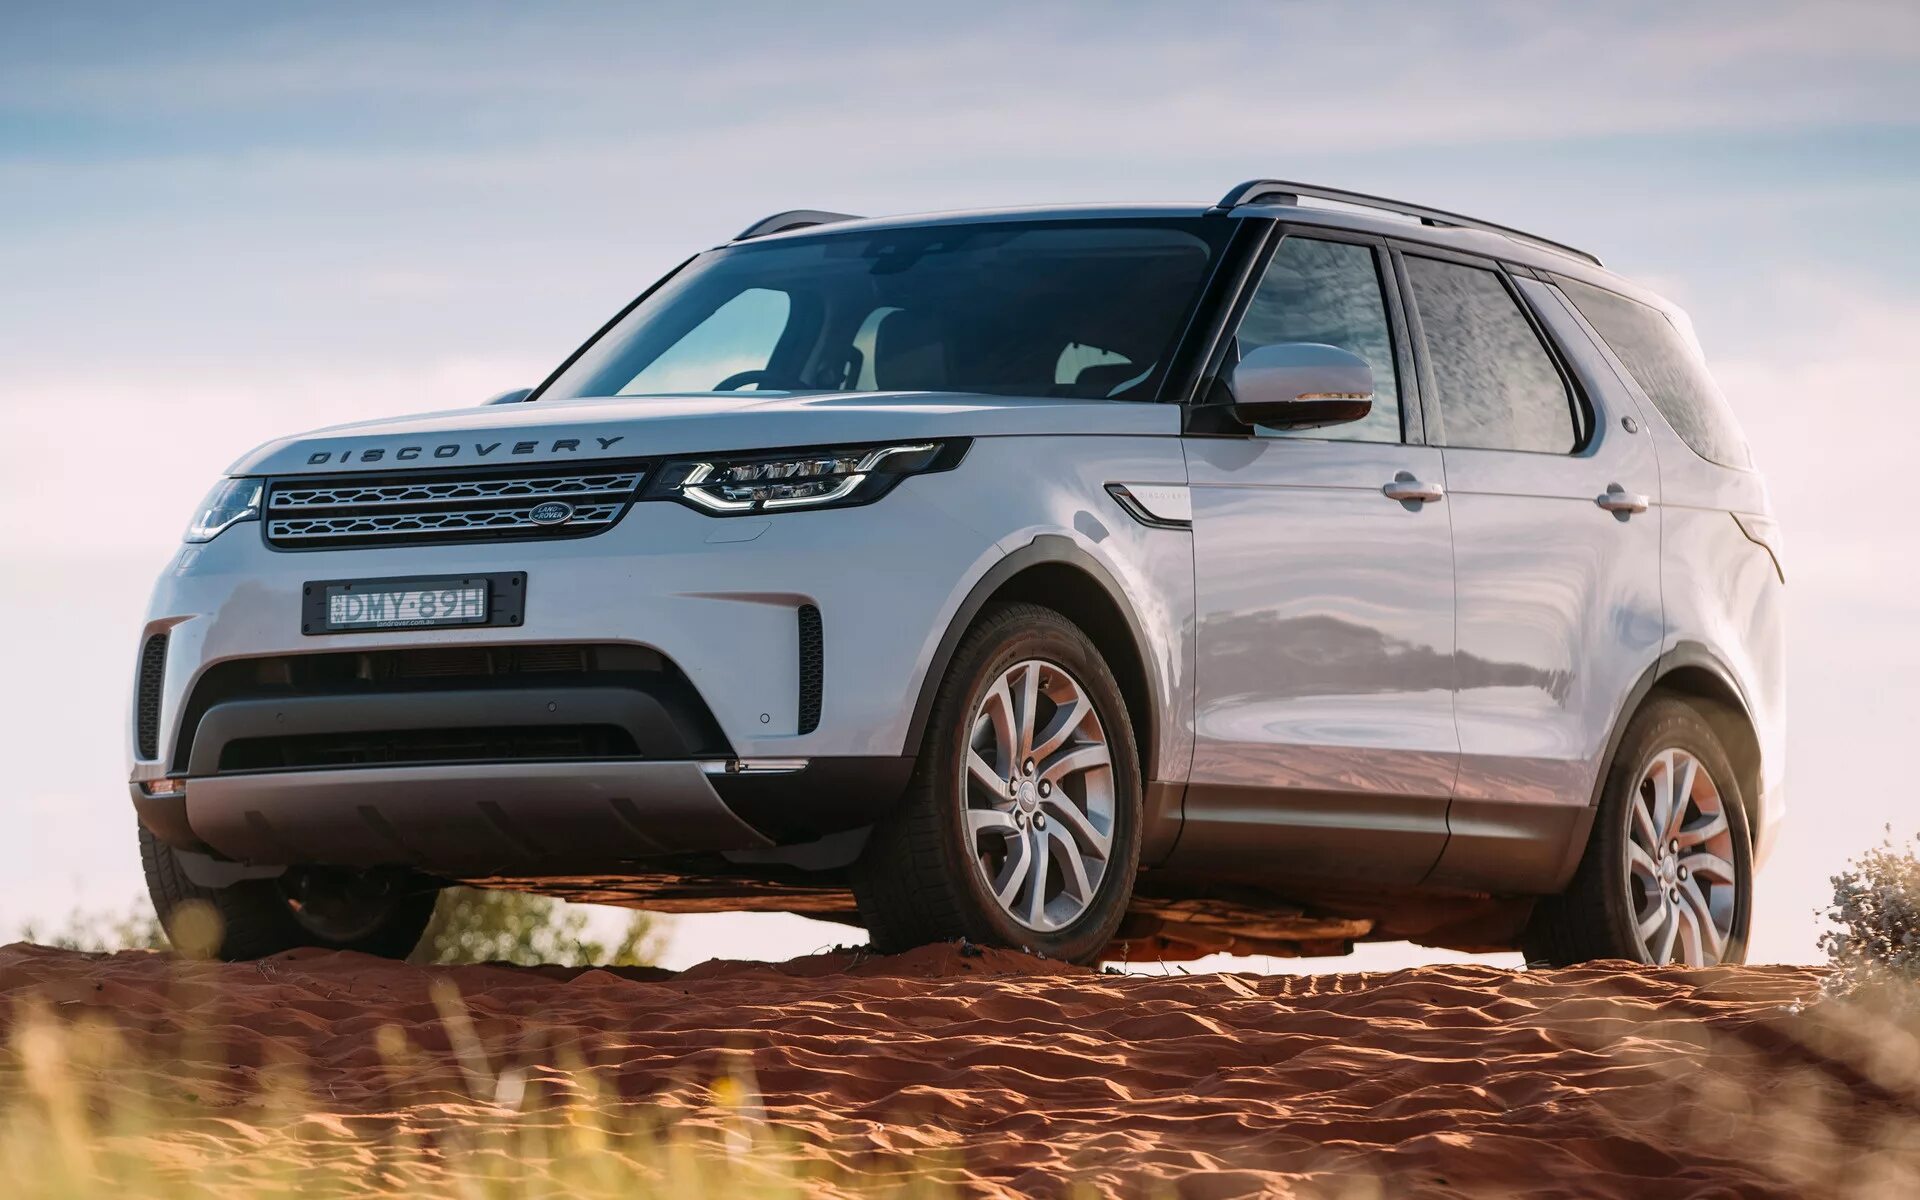 Дискавери 720. Land Rover Discovery 2022. Ленд Ровер Discovery 2017. Ленд Ровер Дискавери 4 2017. Ленд Ровер Дискавери 2021.